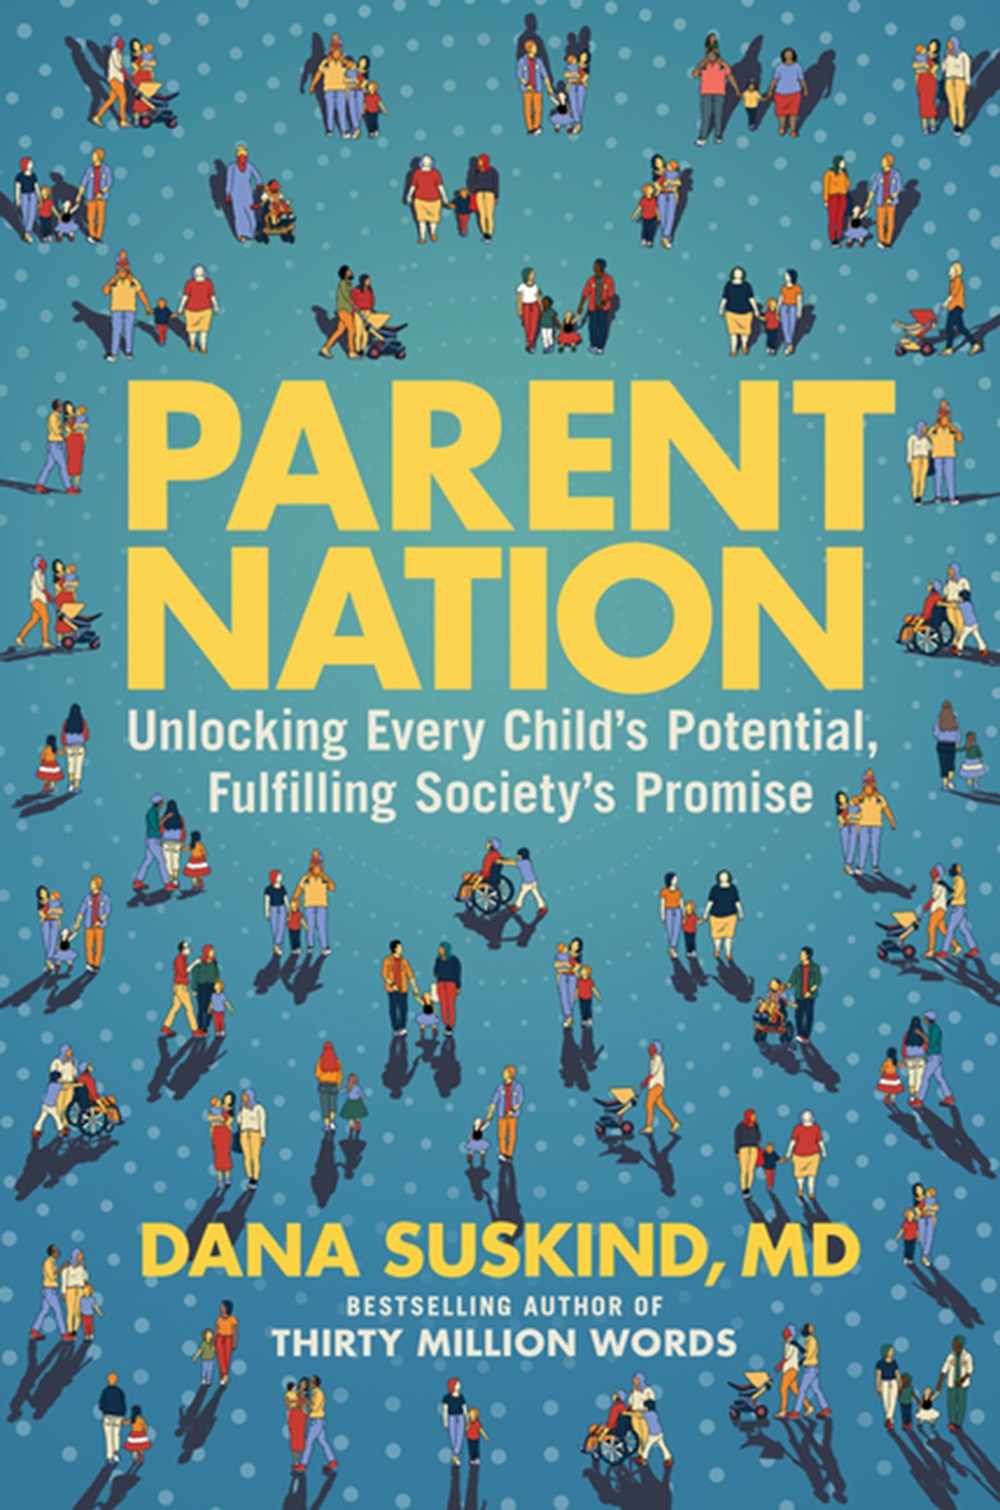 Parent Nation Unlocking Every Child's Potential, Fulfilling Society's Promise